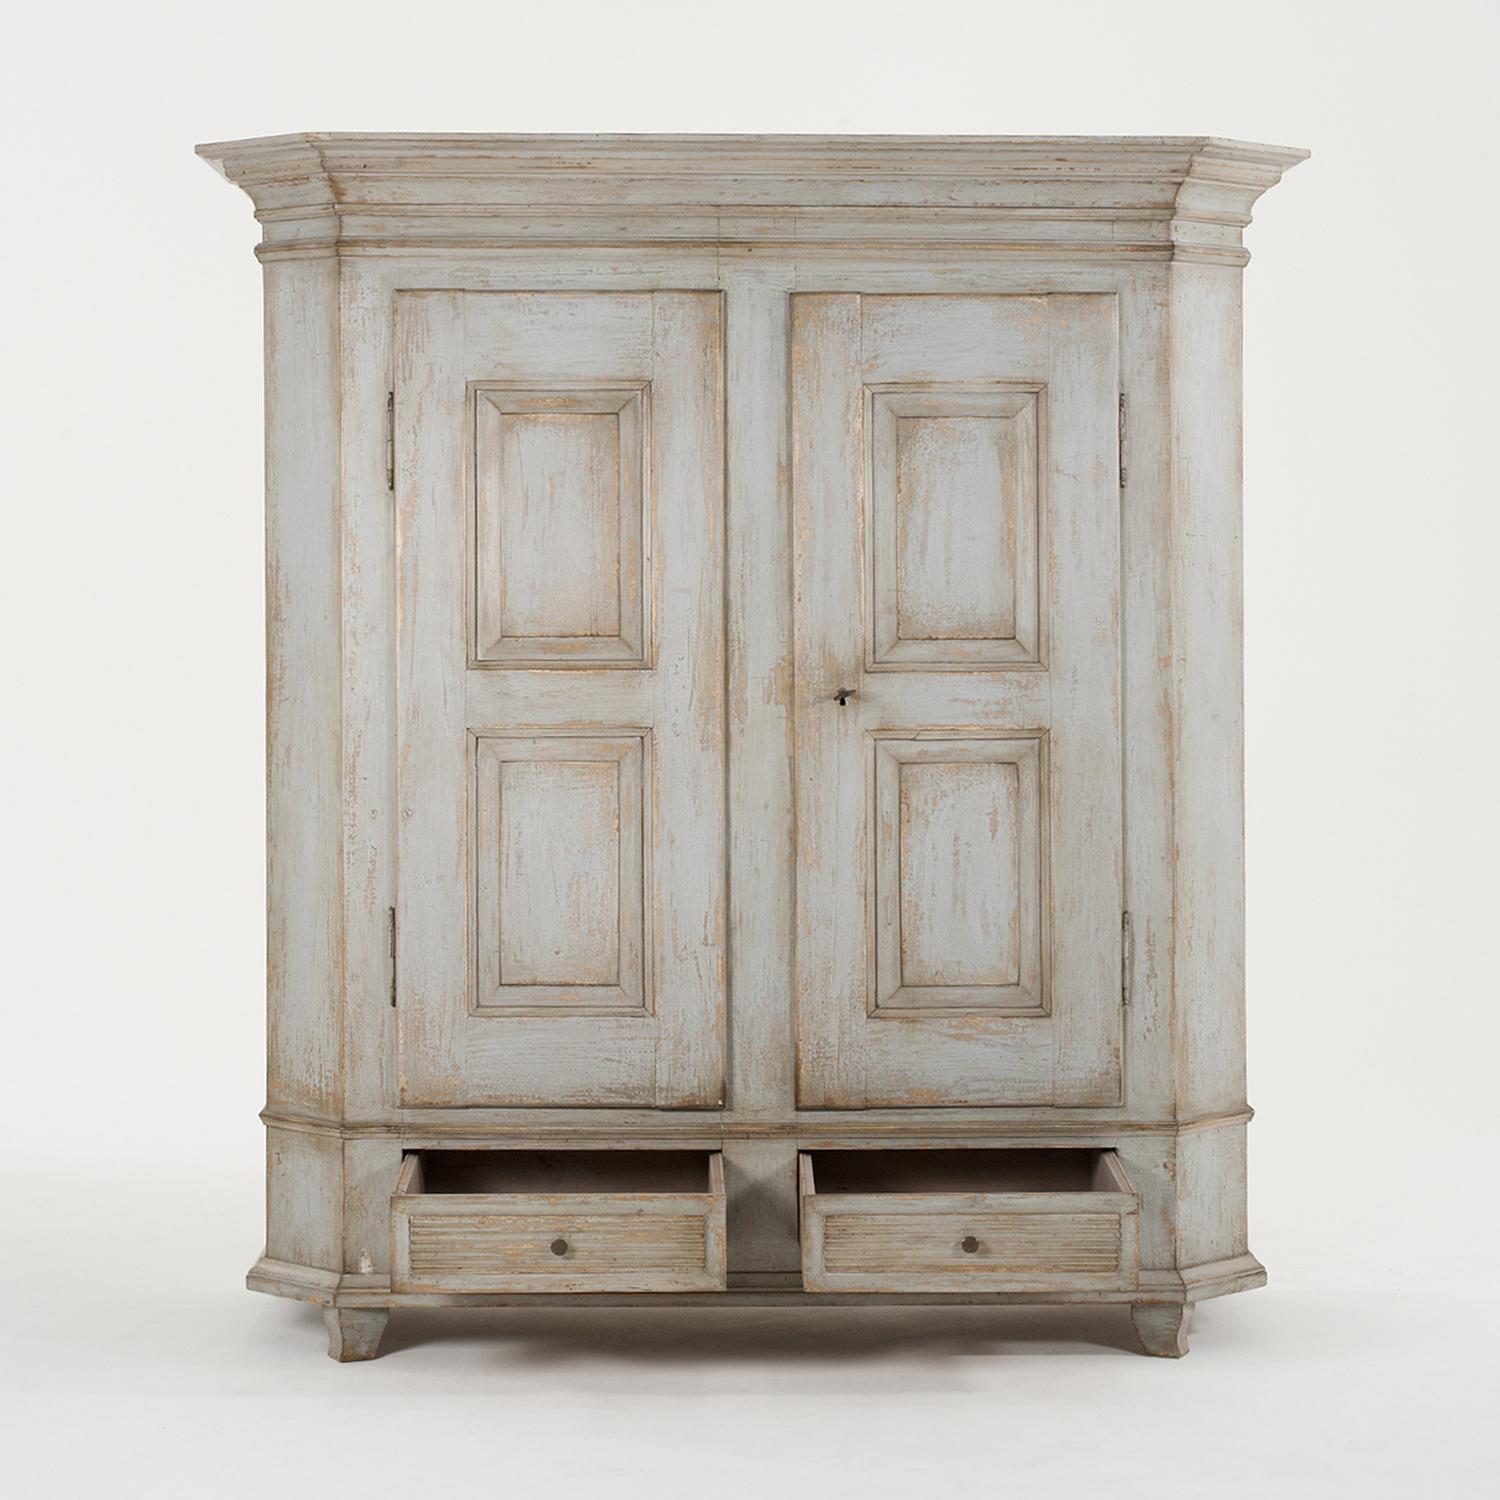 A blue-grey, antique Swedish Gustavian armoire, wardrobe made of hand crafted painted Pinewood, in good condition. The tall Scandinavian cabinet is composed with two doors and two lower drawers, detailed with round door pulls, handles, supported by